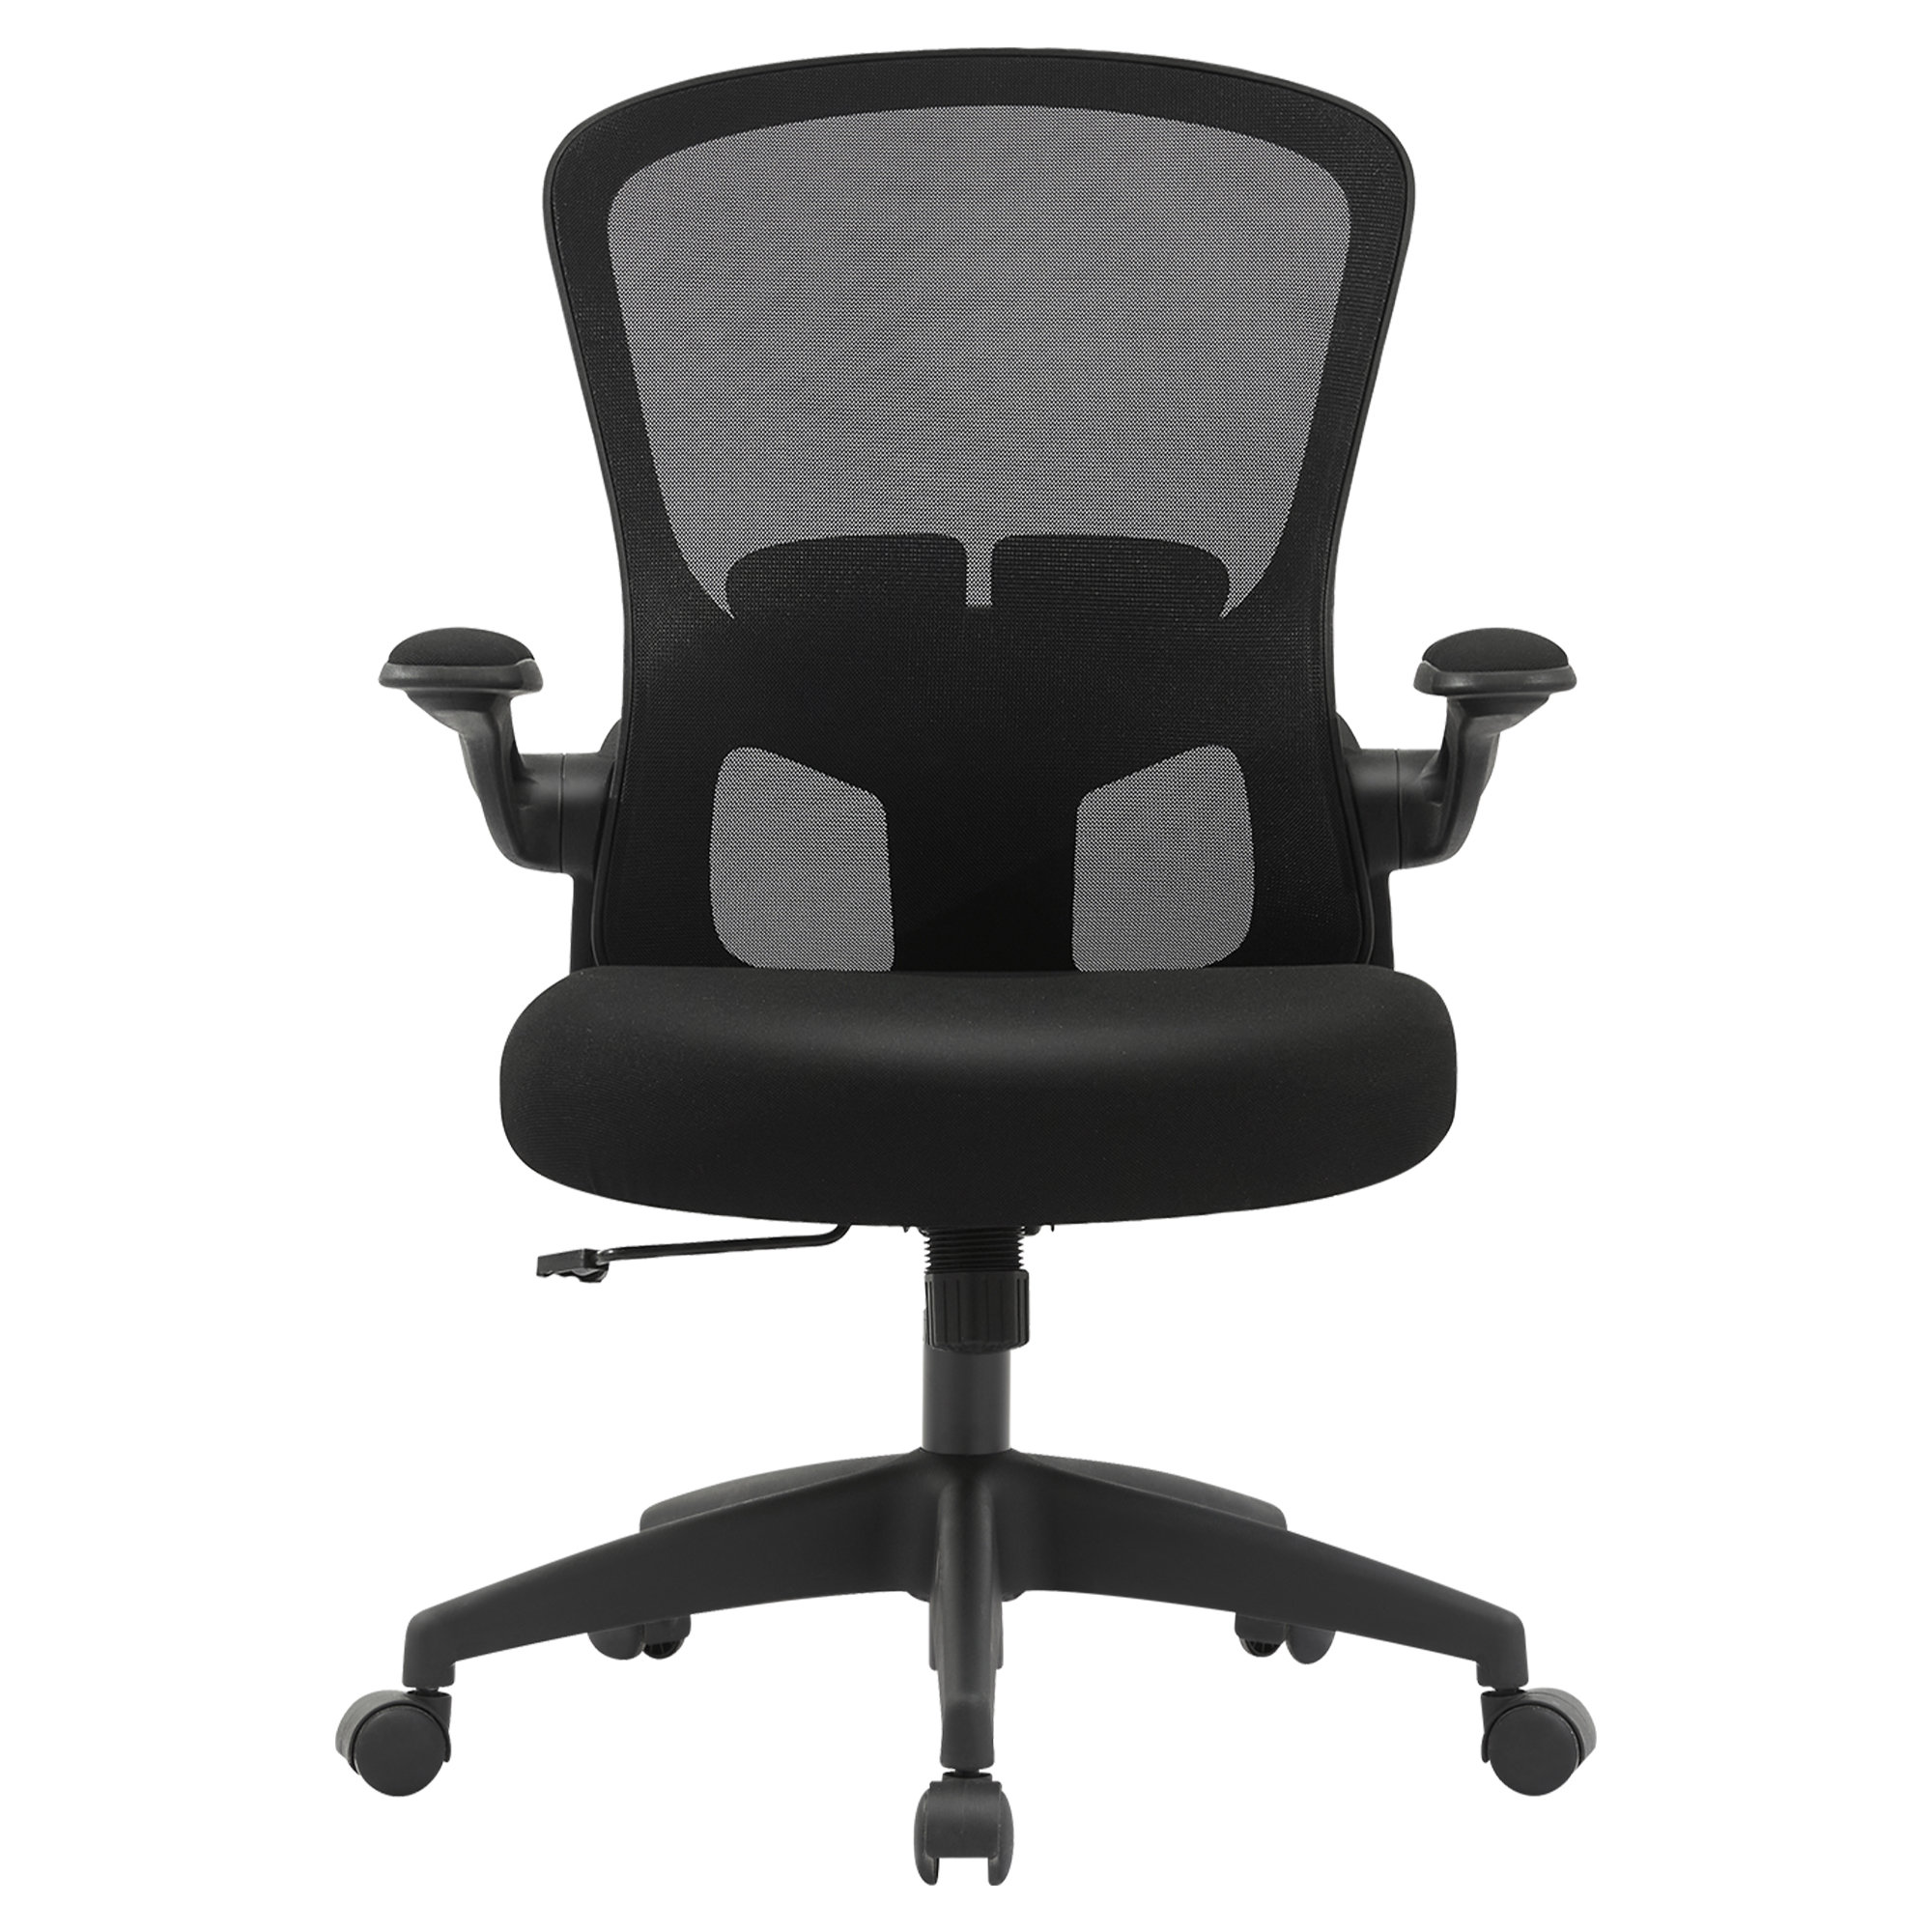 FelixKing Office Chair, Ergonomic Desk Chair with Adjustable Height and Lumbar Support Swivel Lumbar Support Desk Computer Chair with Flip Up